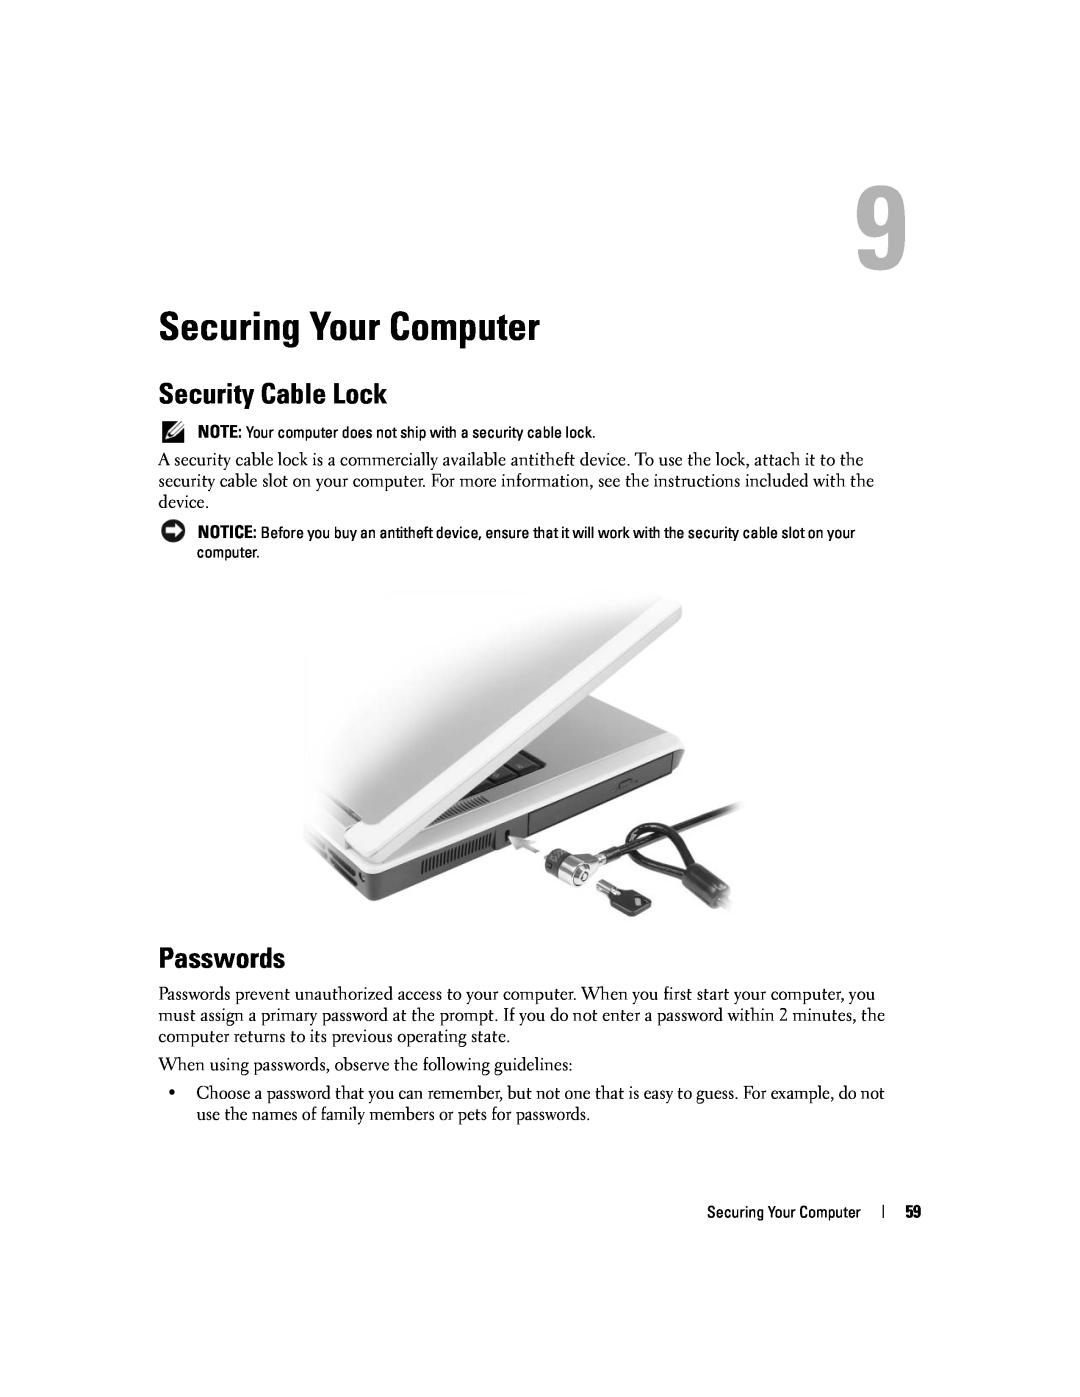 Dell 1501 owner manual Securing Your Computer, Security Cable Lock, Passwords 